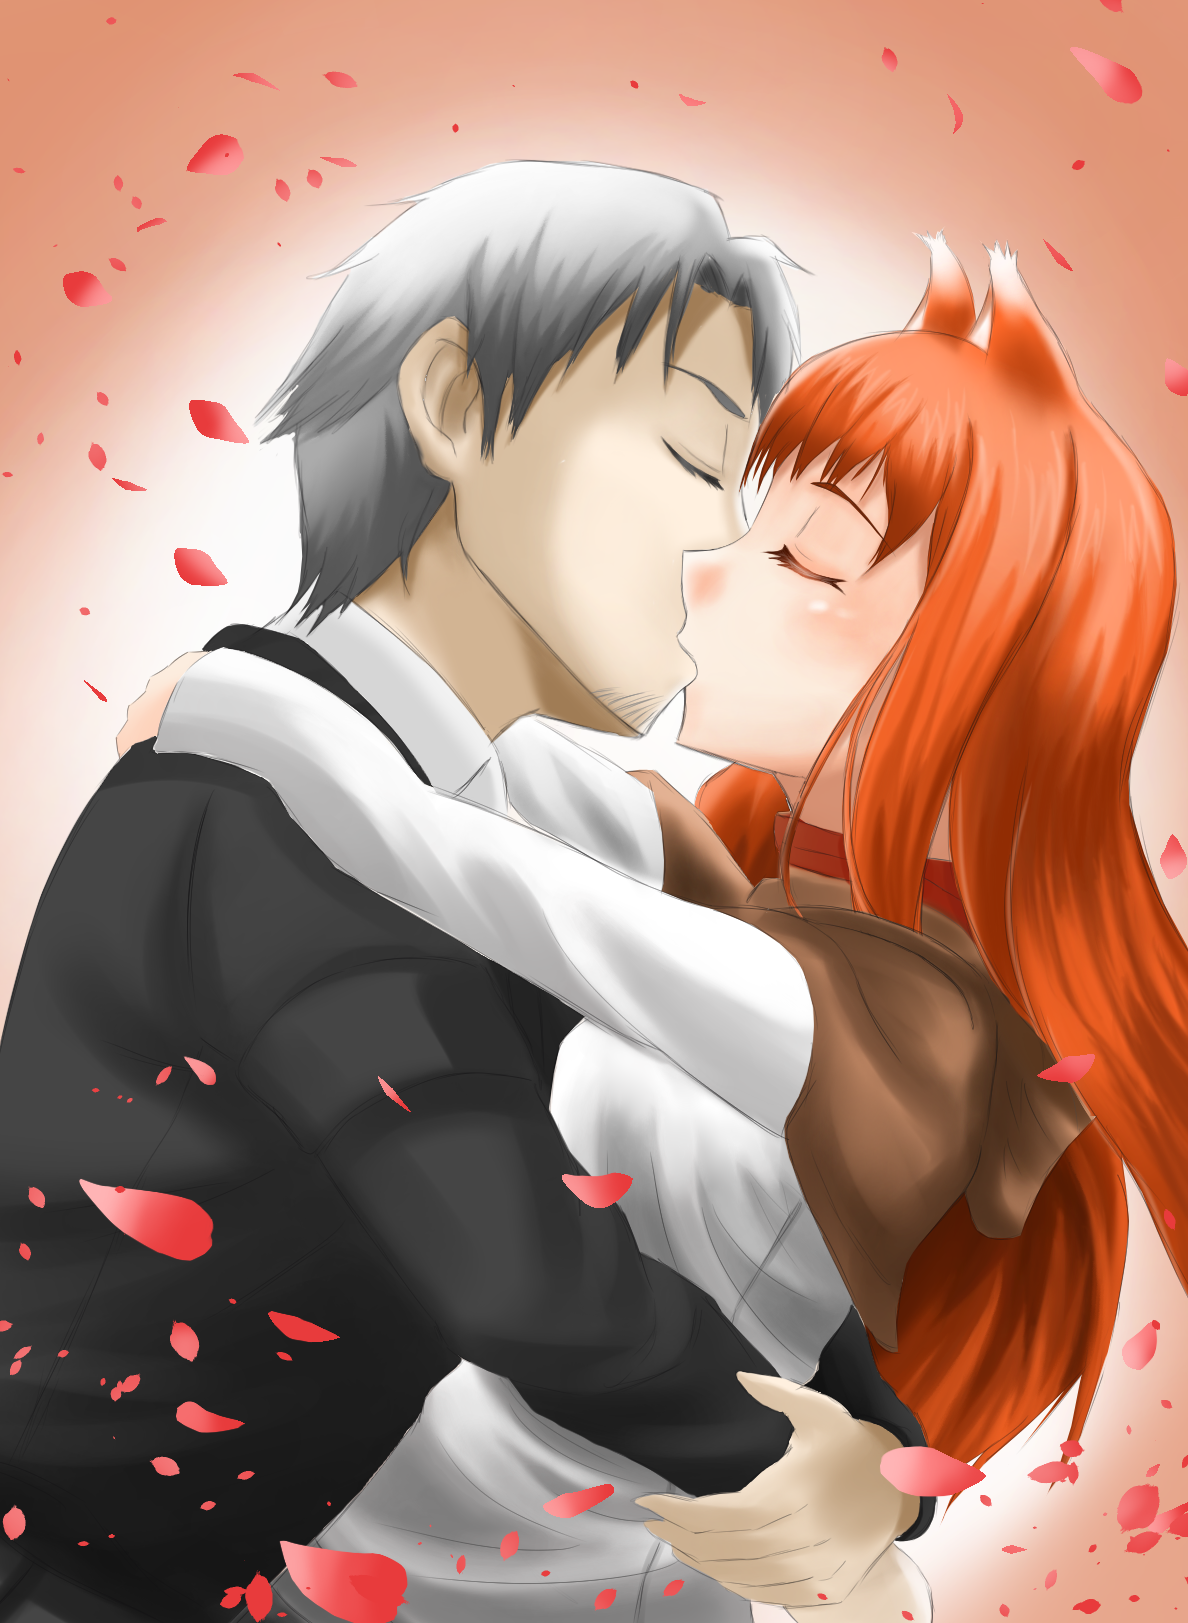 Spice and Wolf. - Anime art, Anime, Spice and Wolf, Horo holo, Holo, Kraft lawrence